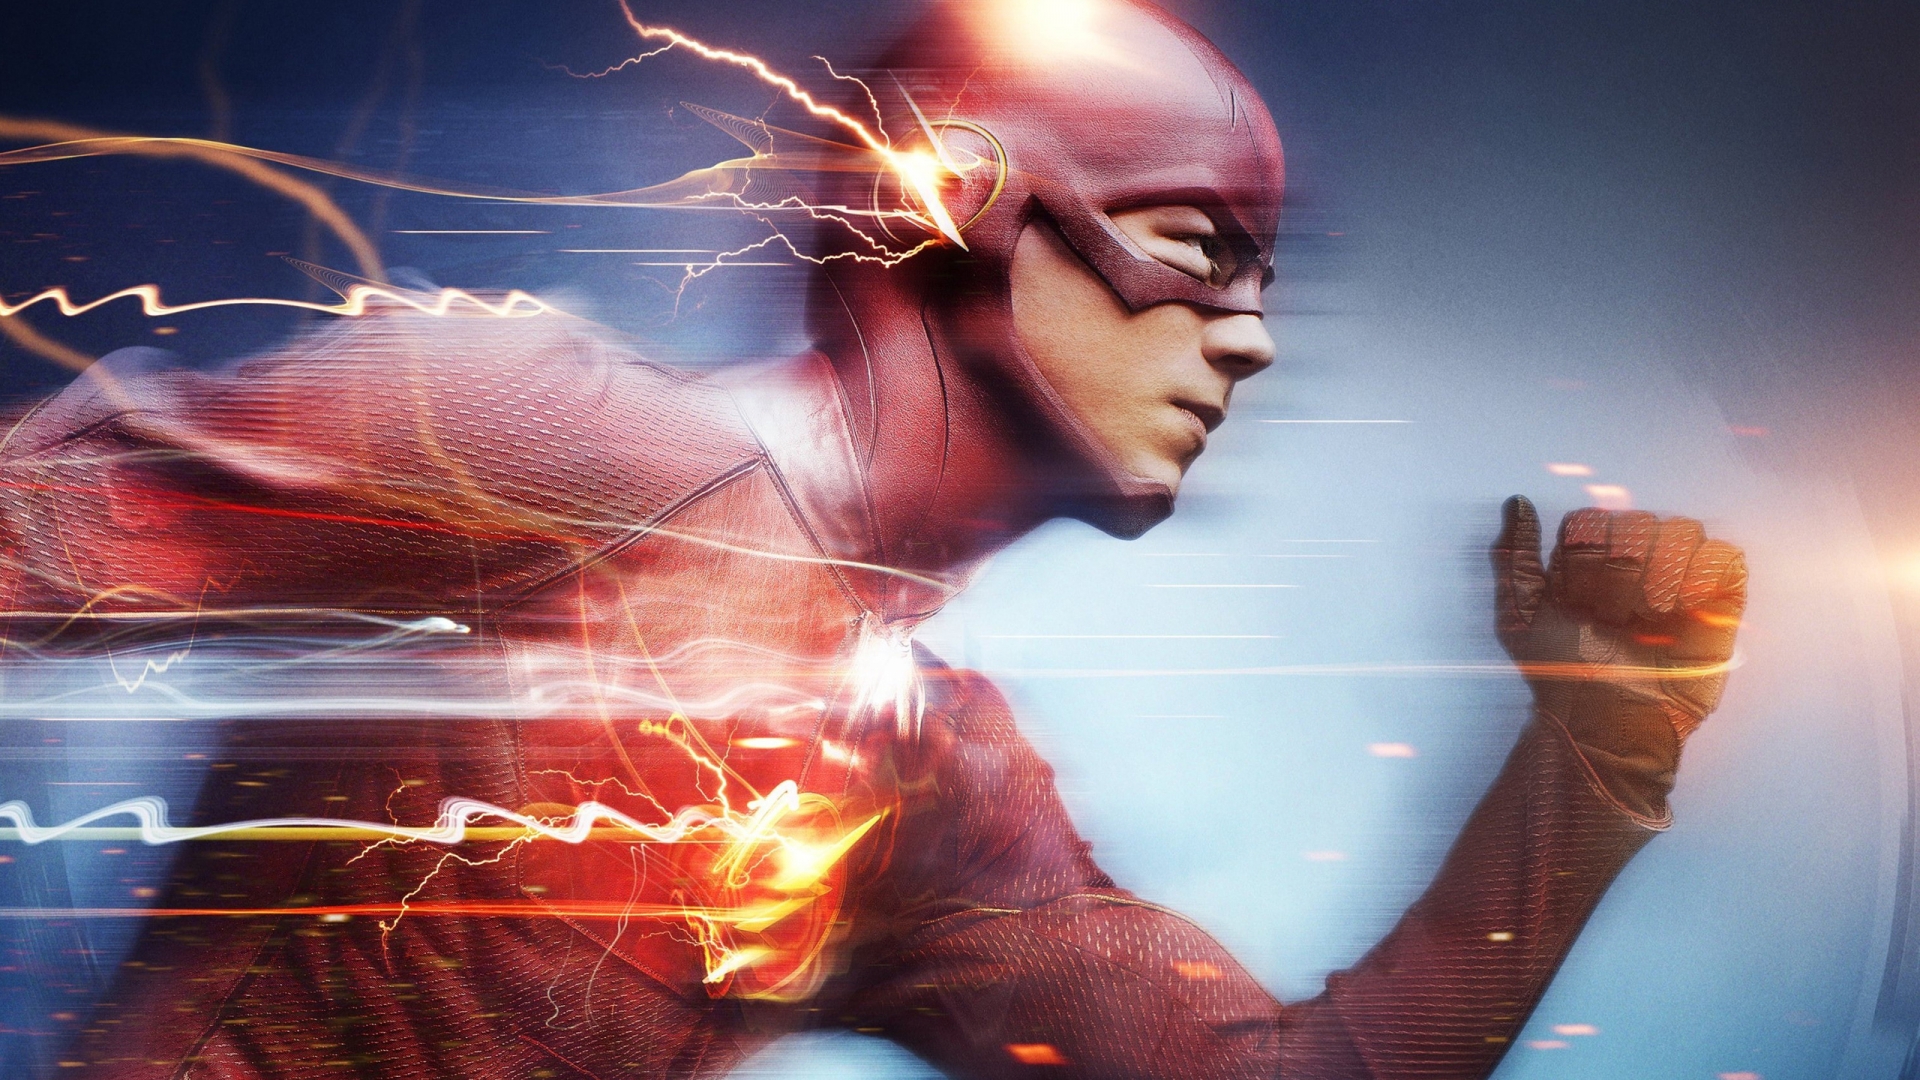 Barry Allen The Flash for 1920 x 1080 HDTV 1080p resolution